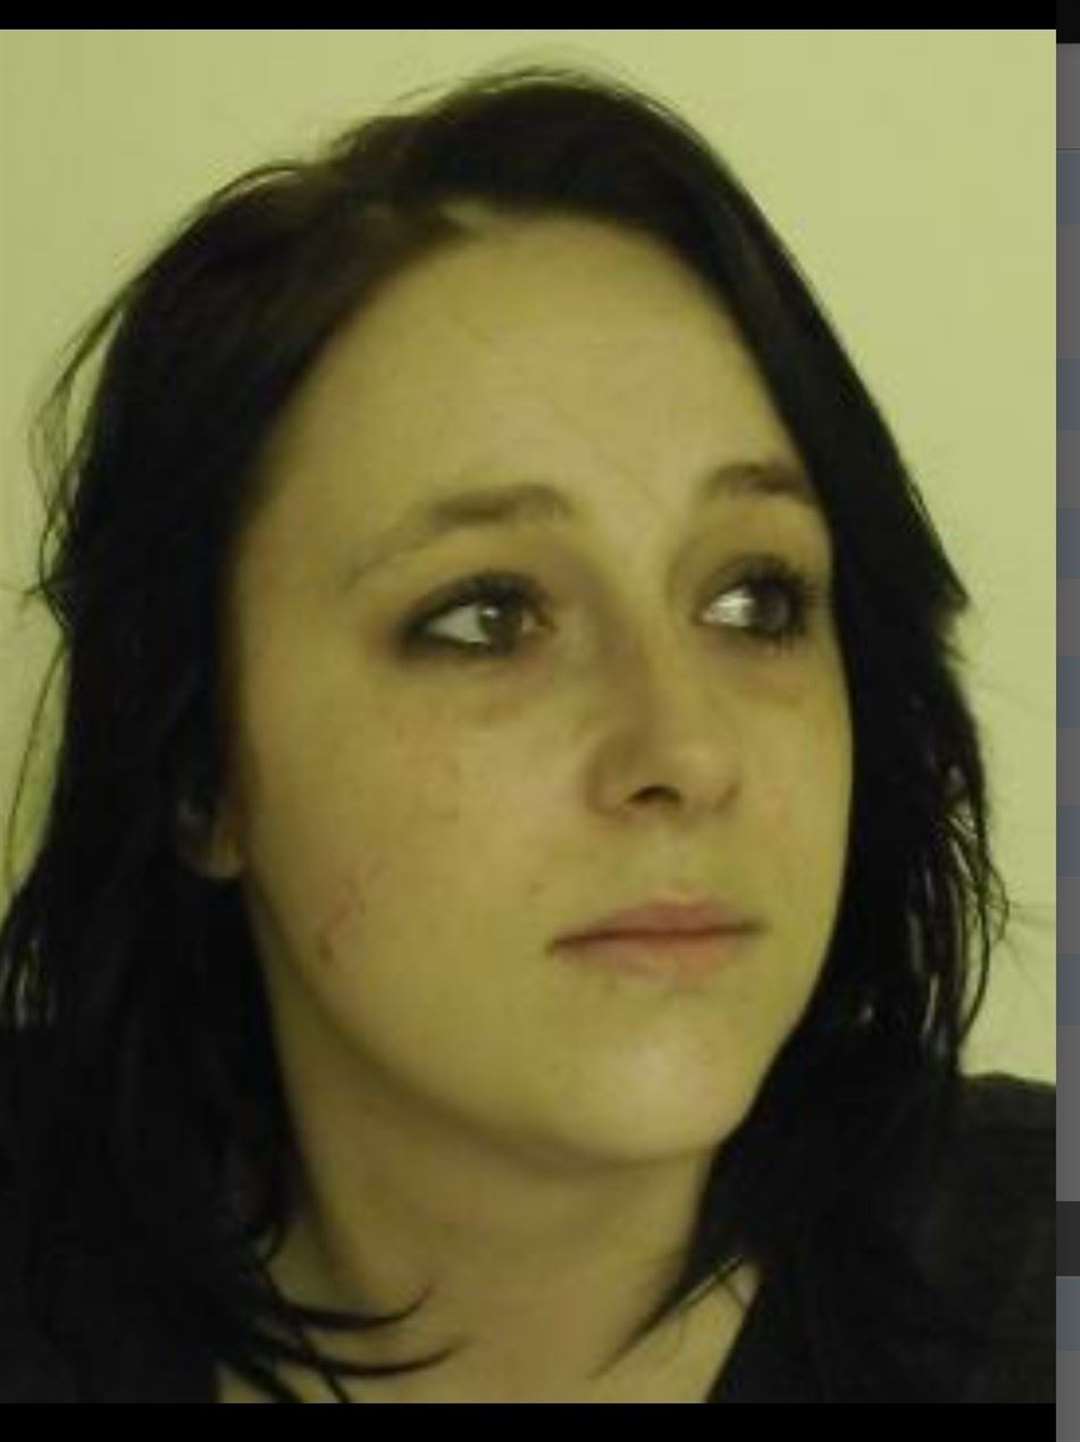 Victoria Streight was reported missing on Saturday. Police said a body had been found on Sunday.